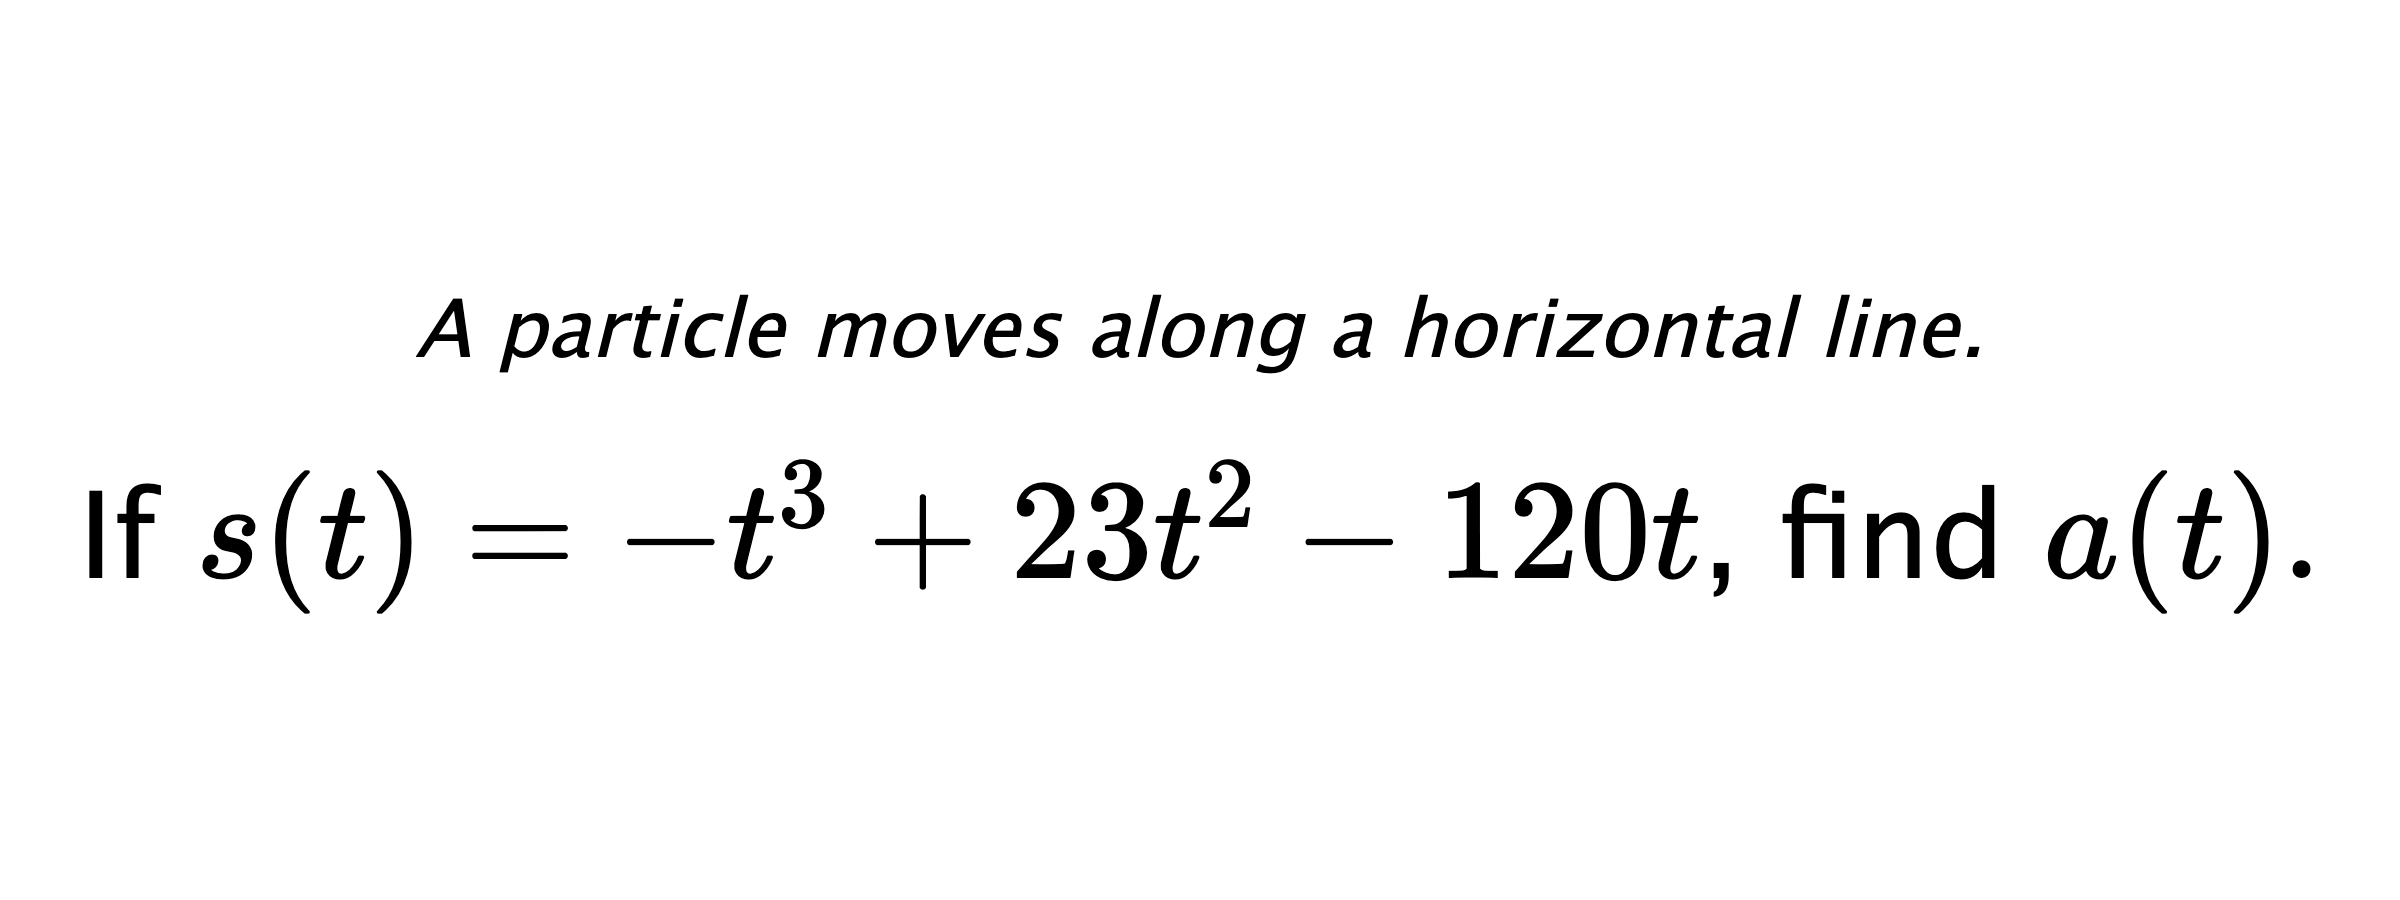 A particle moves along a horizontal line. If $ s(t)=-t^3+23t^2-120t $, find $ a(t). $